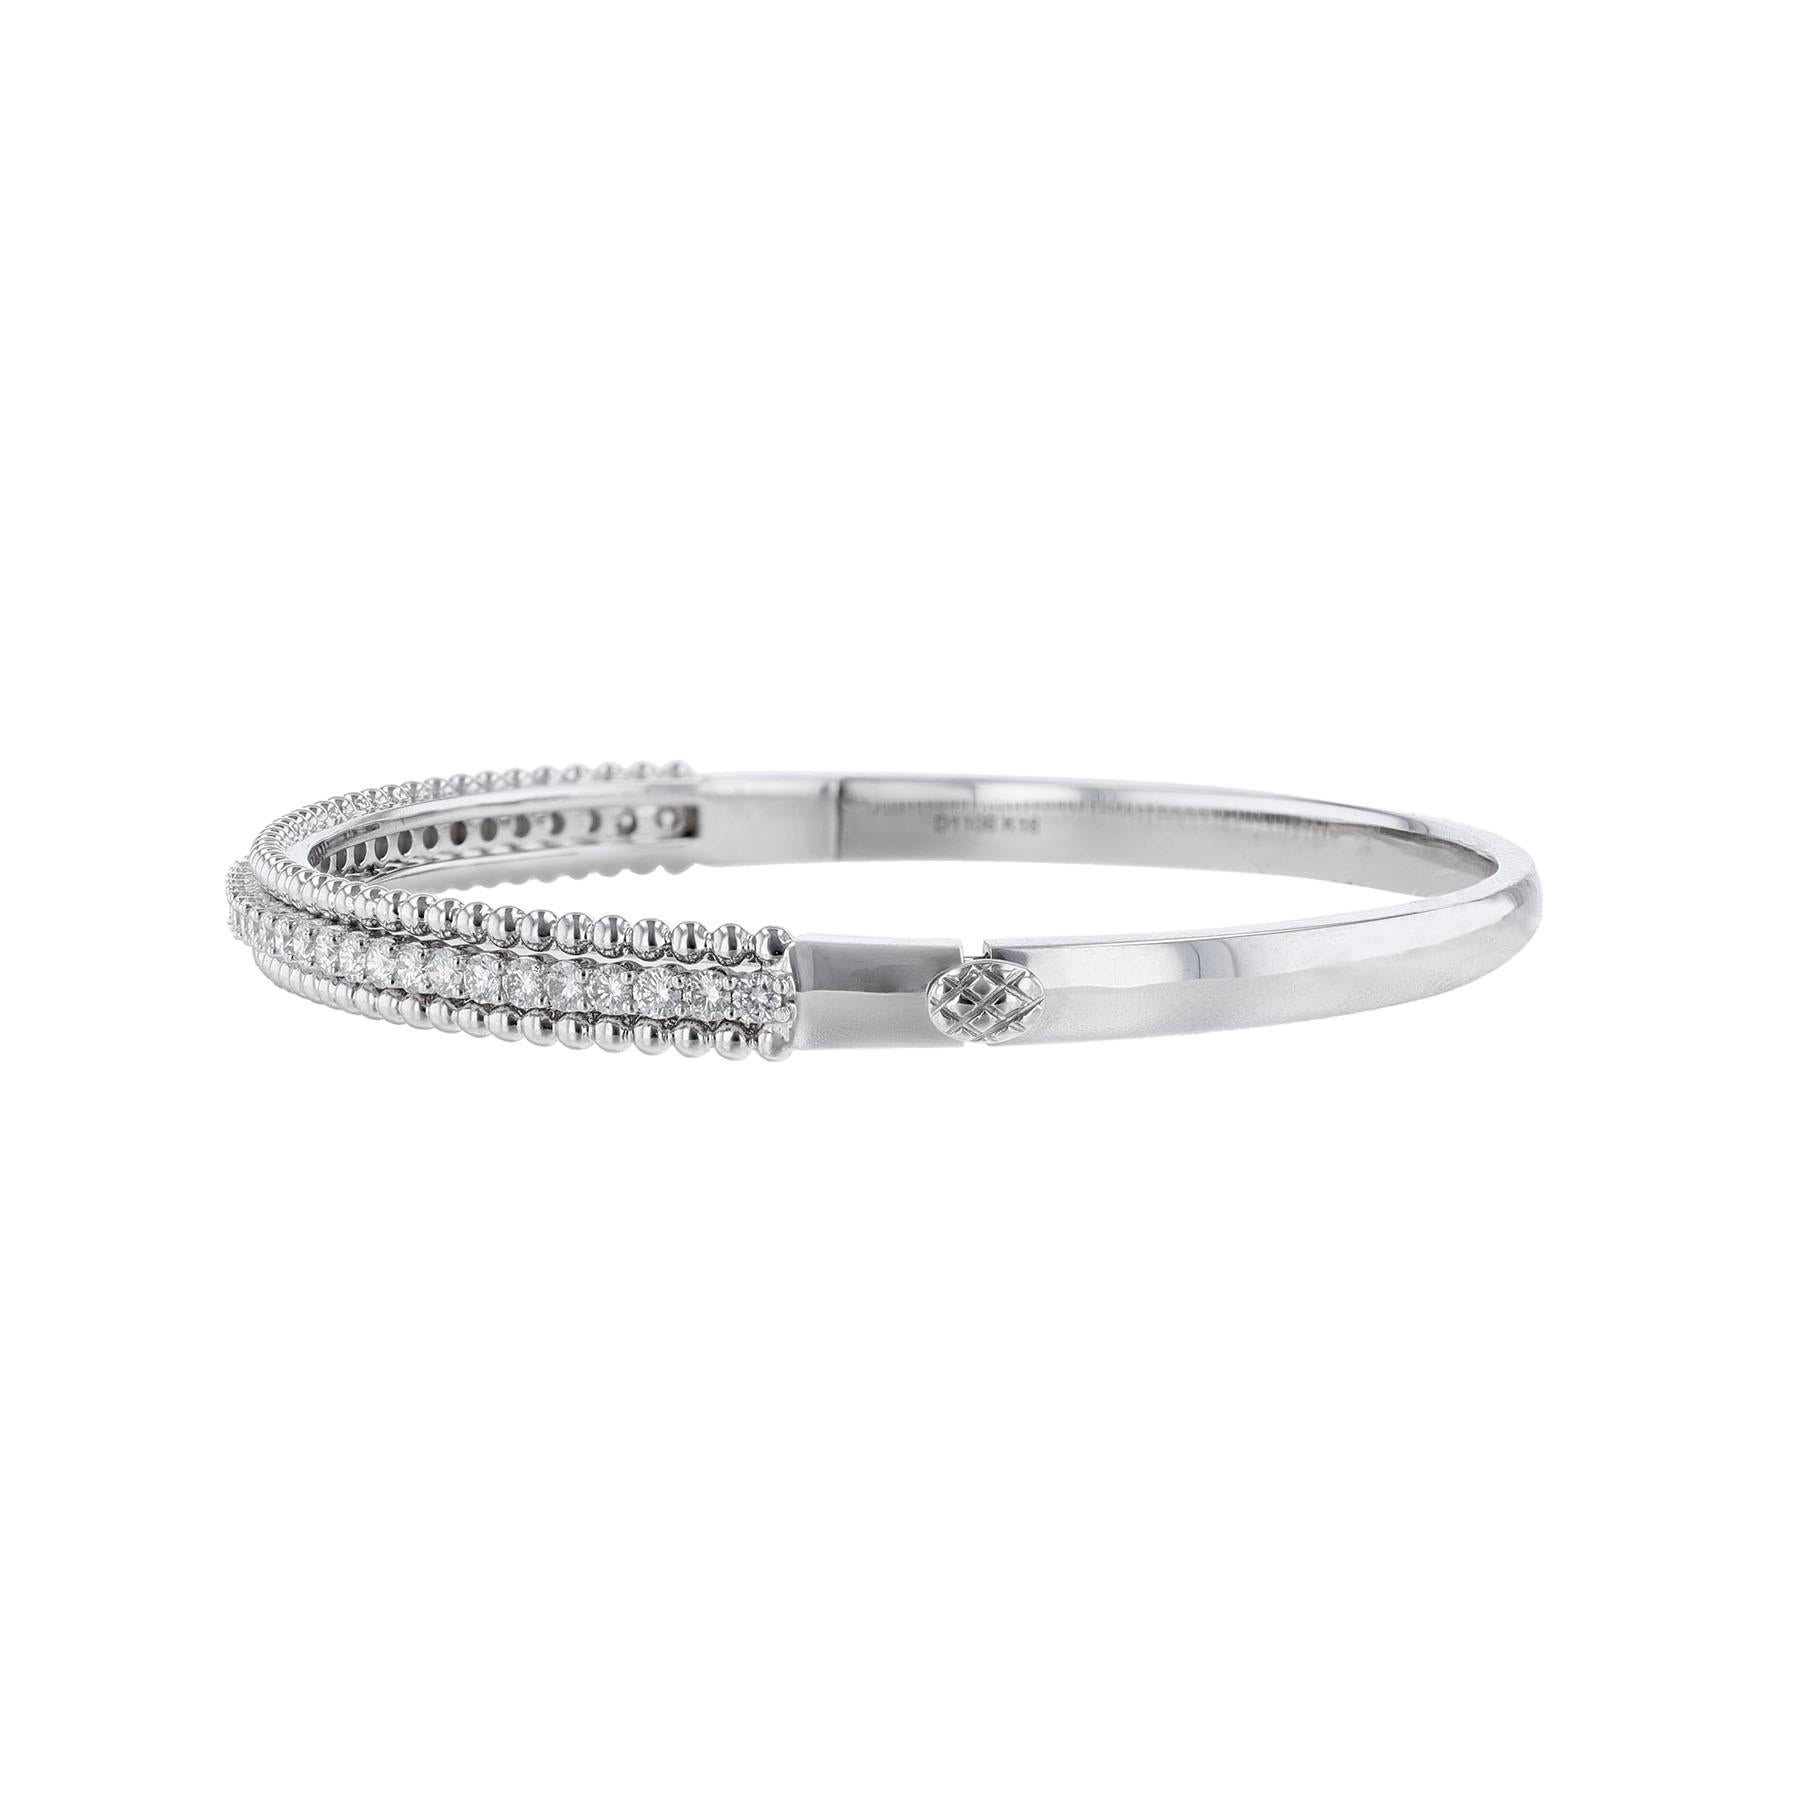 This bangle is made in 18K white gold. Features a center row of 39 round cut diamonds weighing 1.11 carats. This bangle has a color grade (H) and a clarity grade of (SI2).


